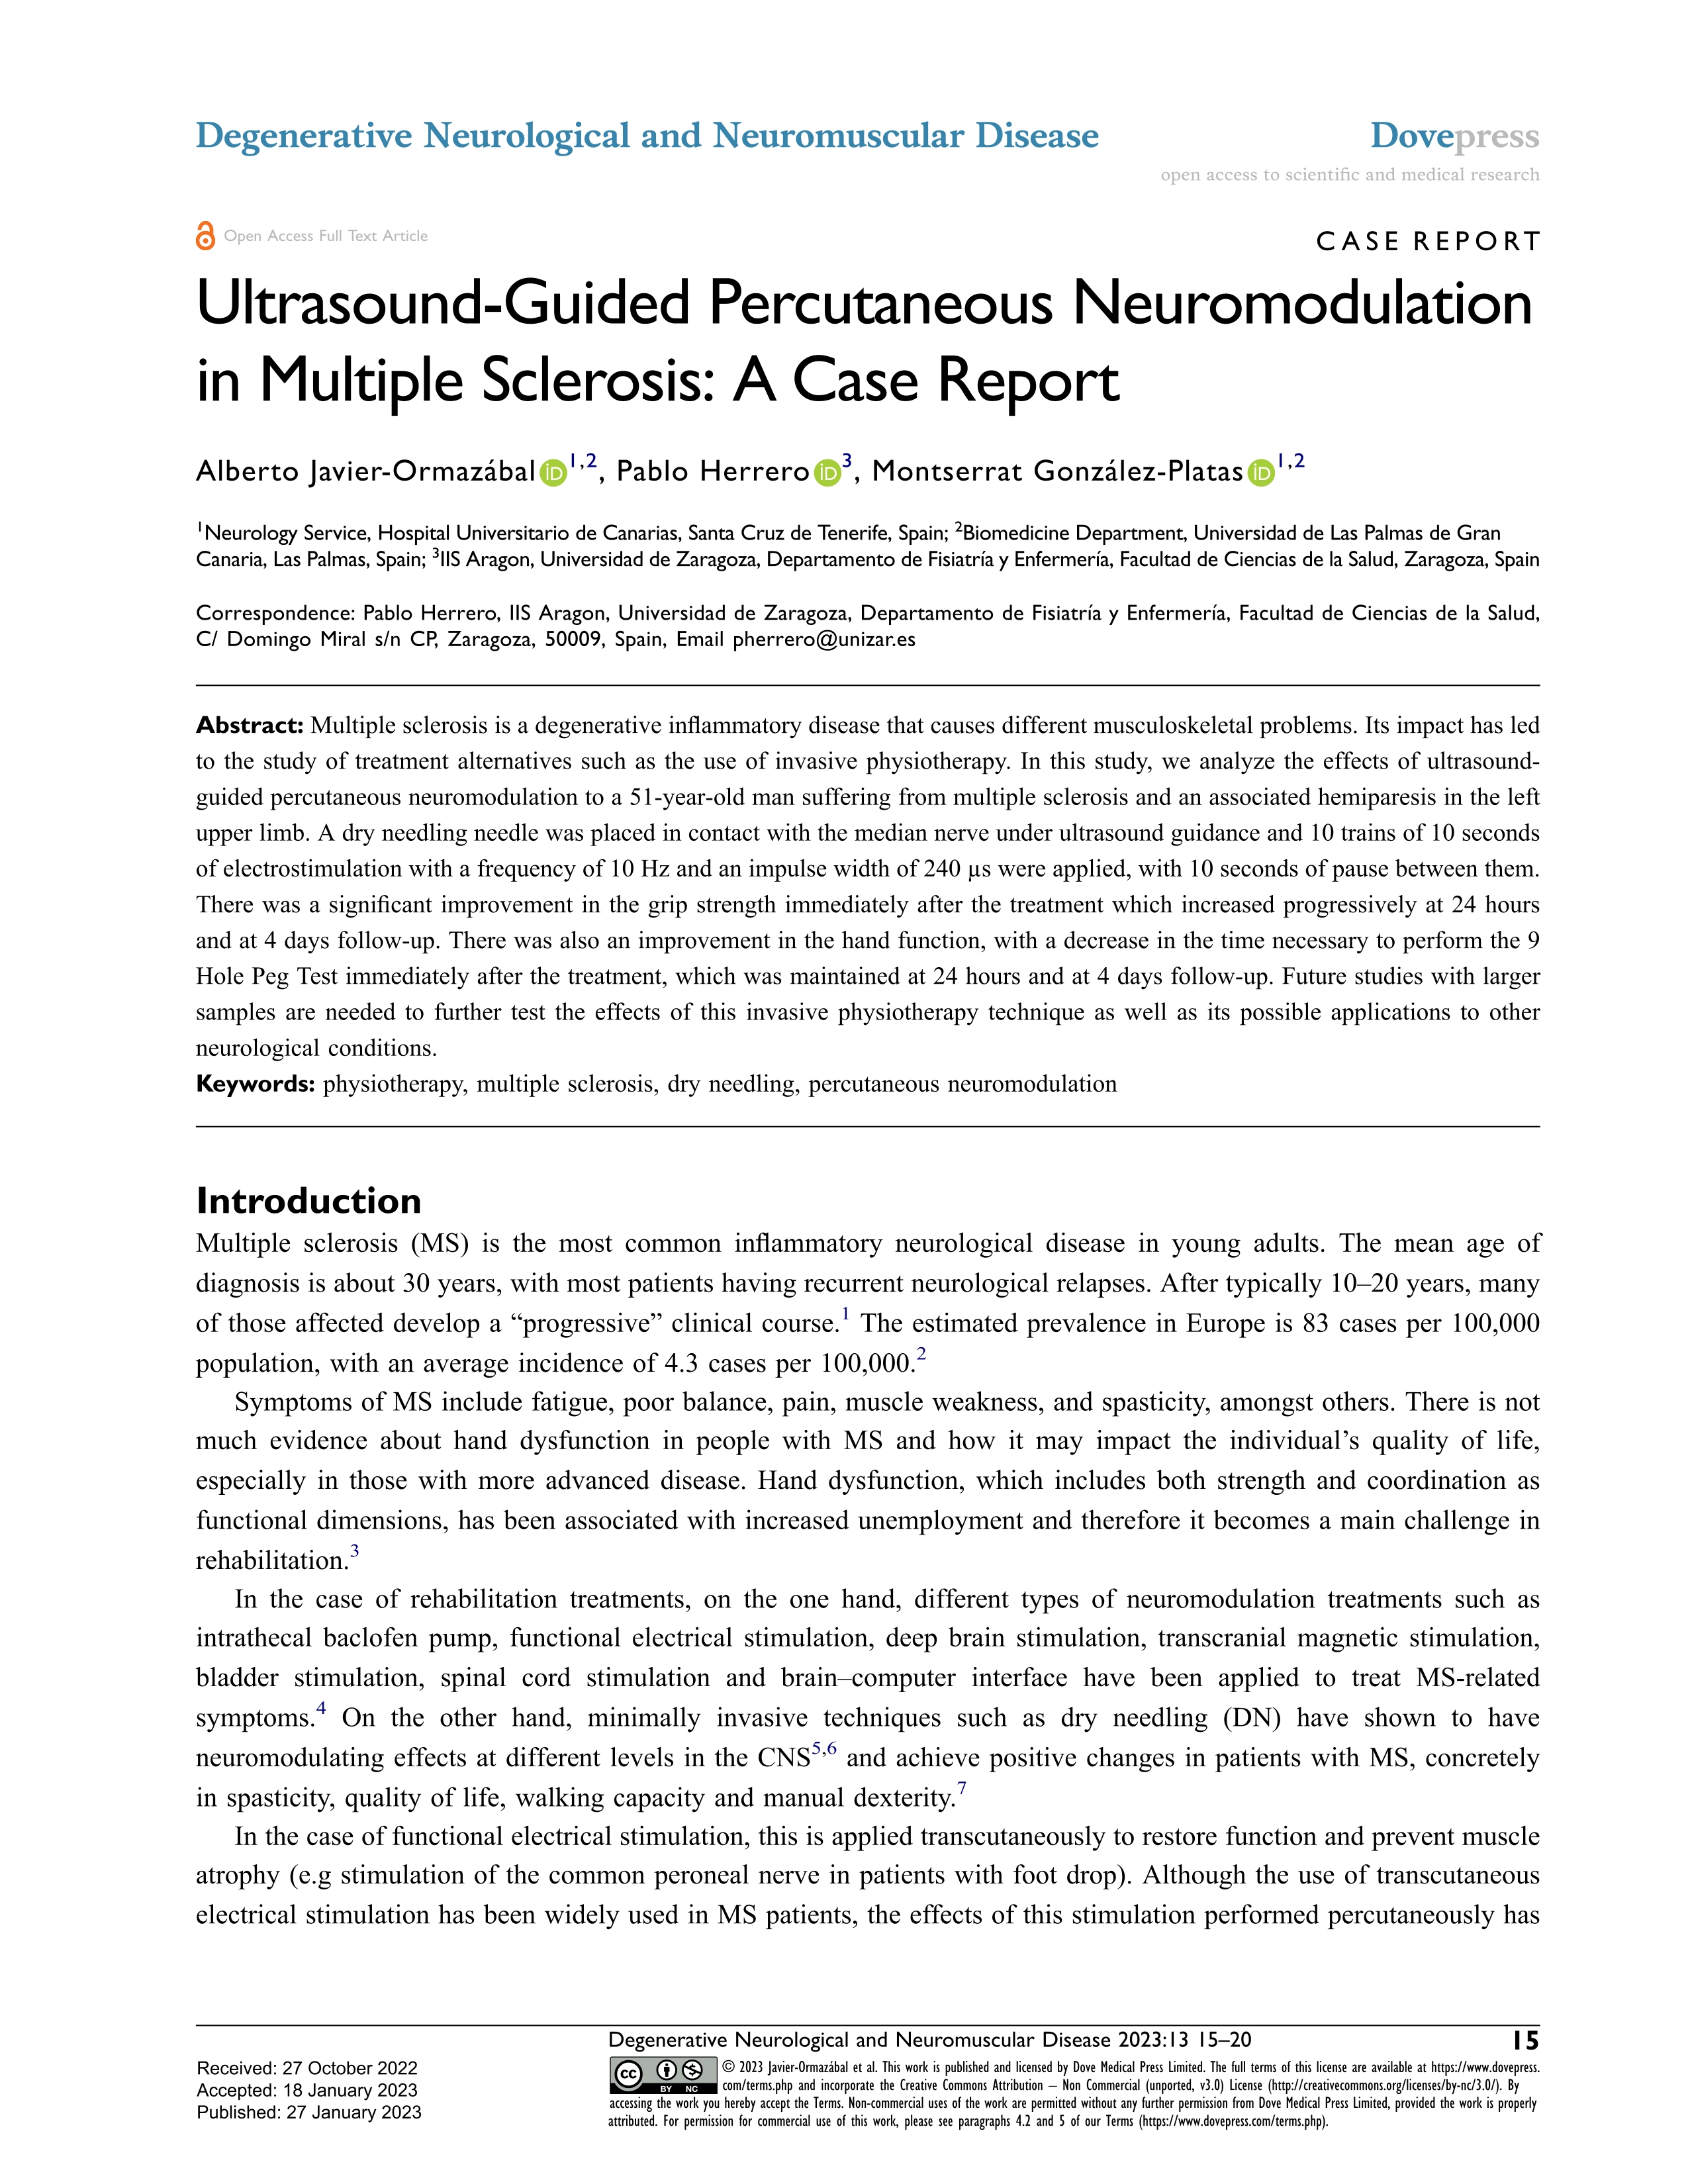 Ultrasound-Guided Percutaneous Neuromodulation in Multiple Sclerosis: A Case Report